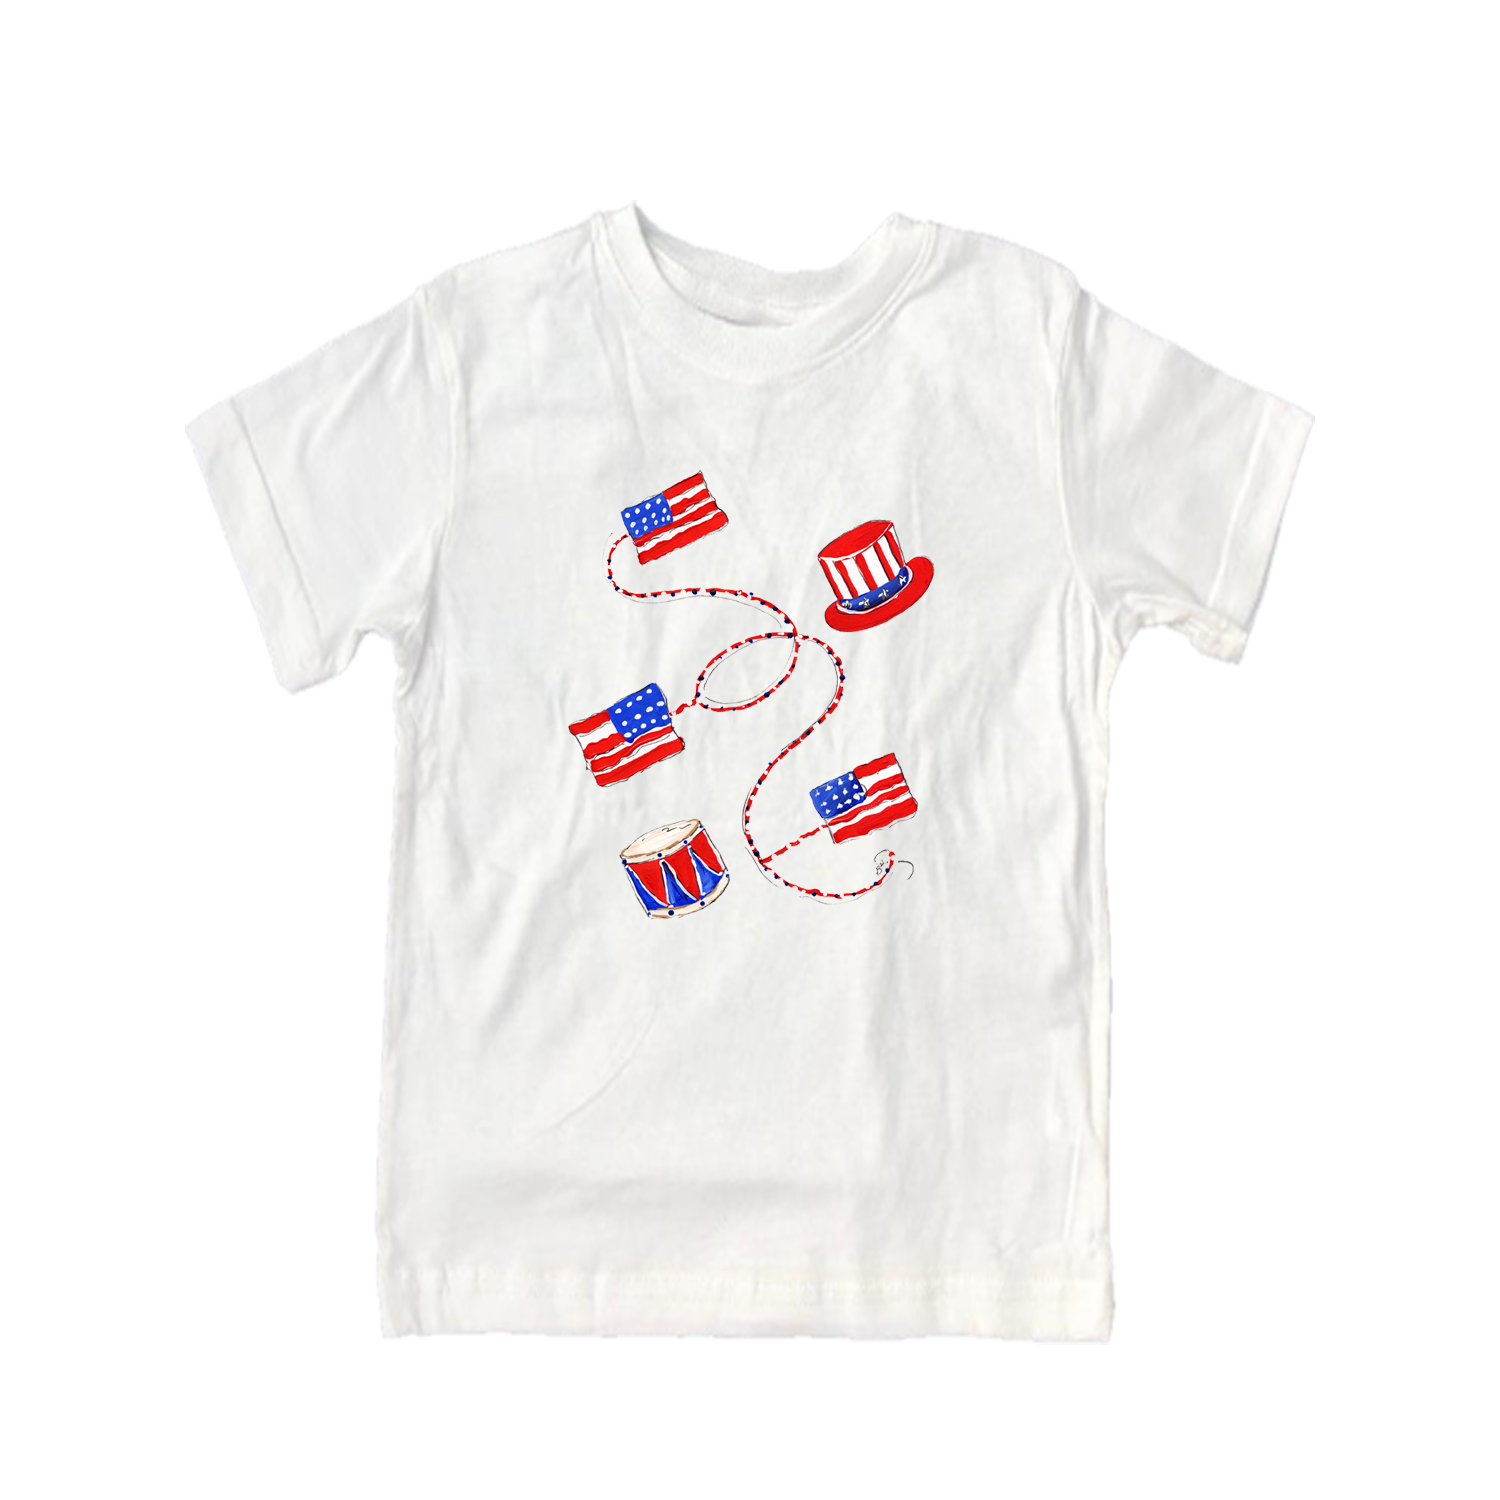 Cotton Tee Shirt Short Sleeve 853 String of 4th July